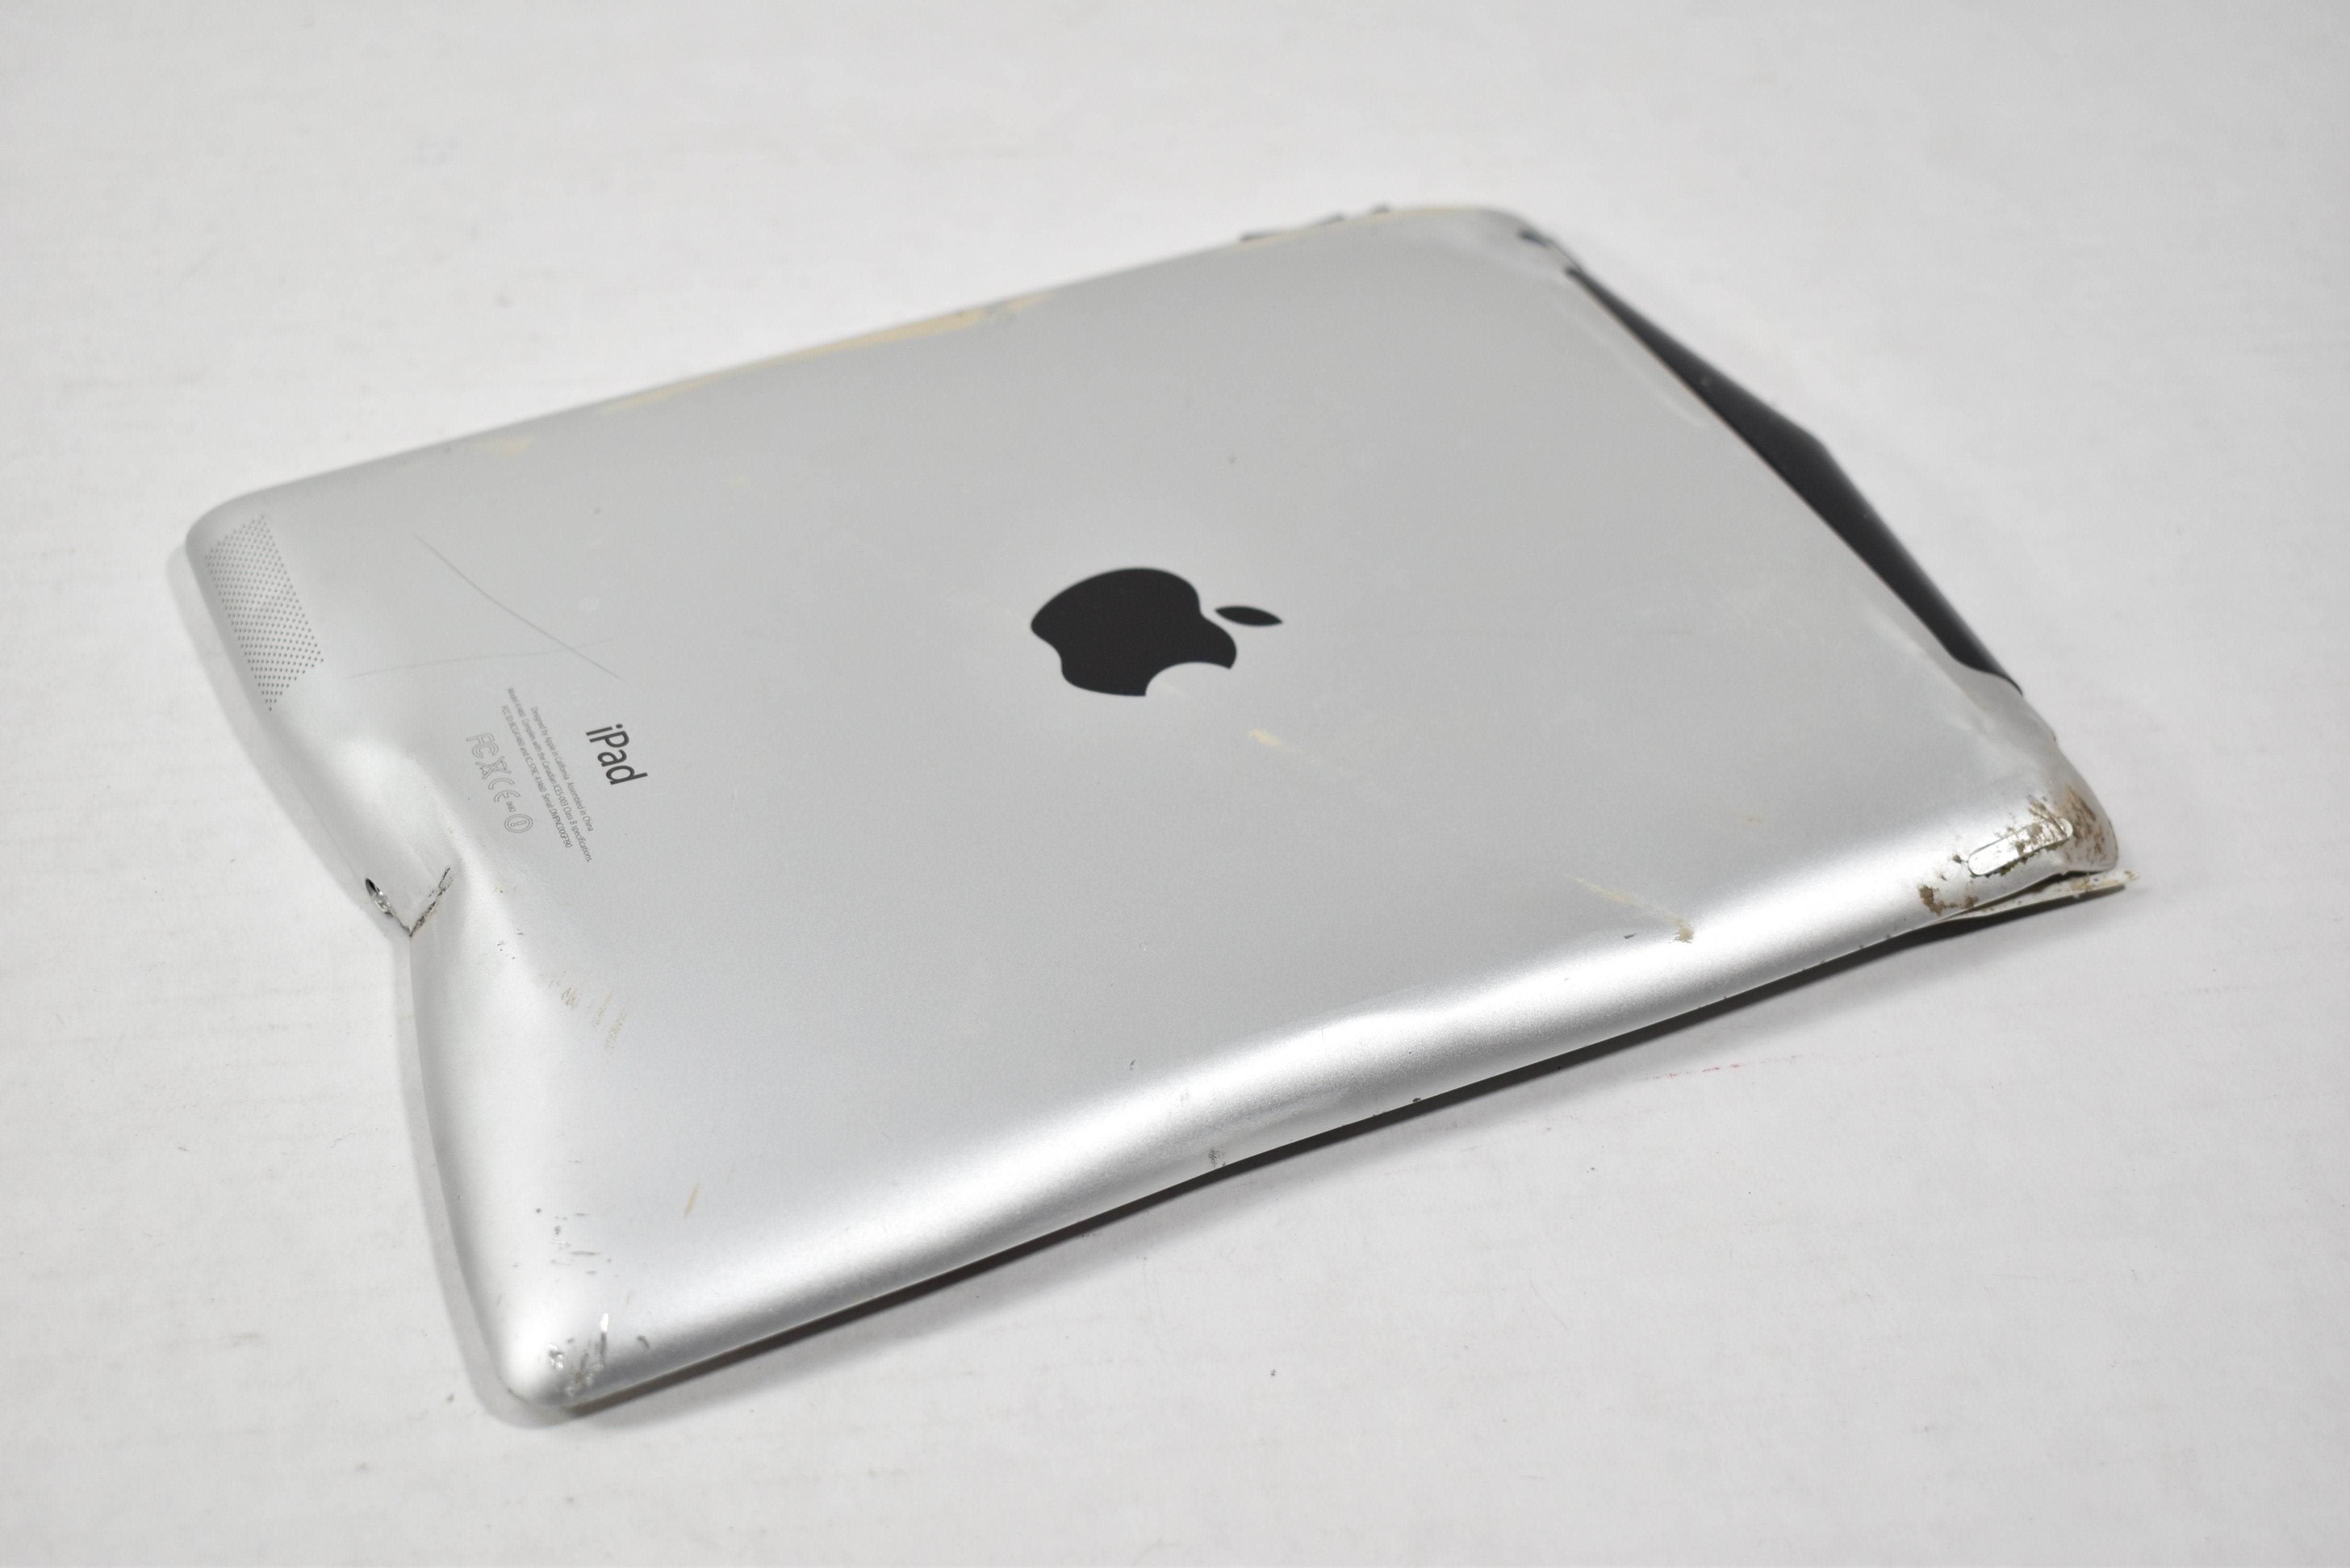 iPad Silver Model - A1460 DAMAGED Parts Only